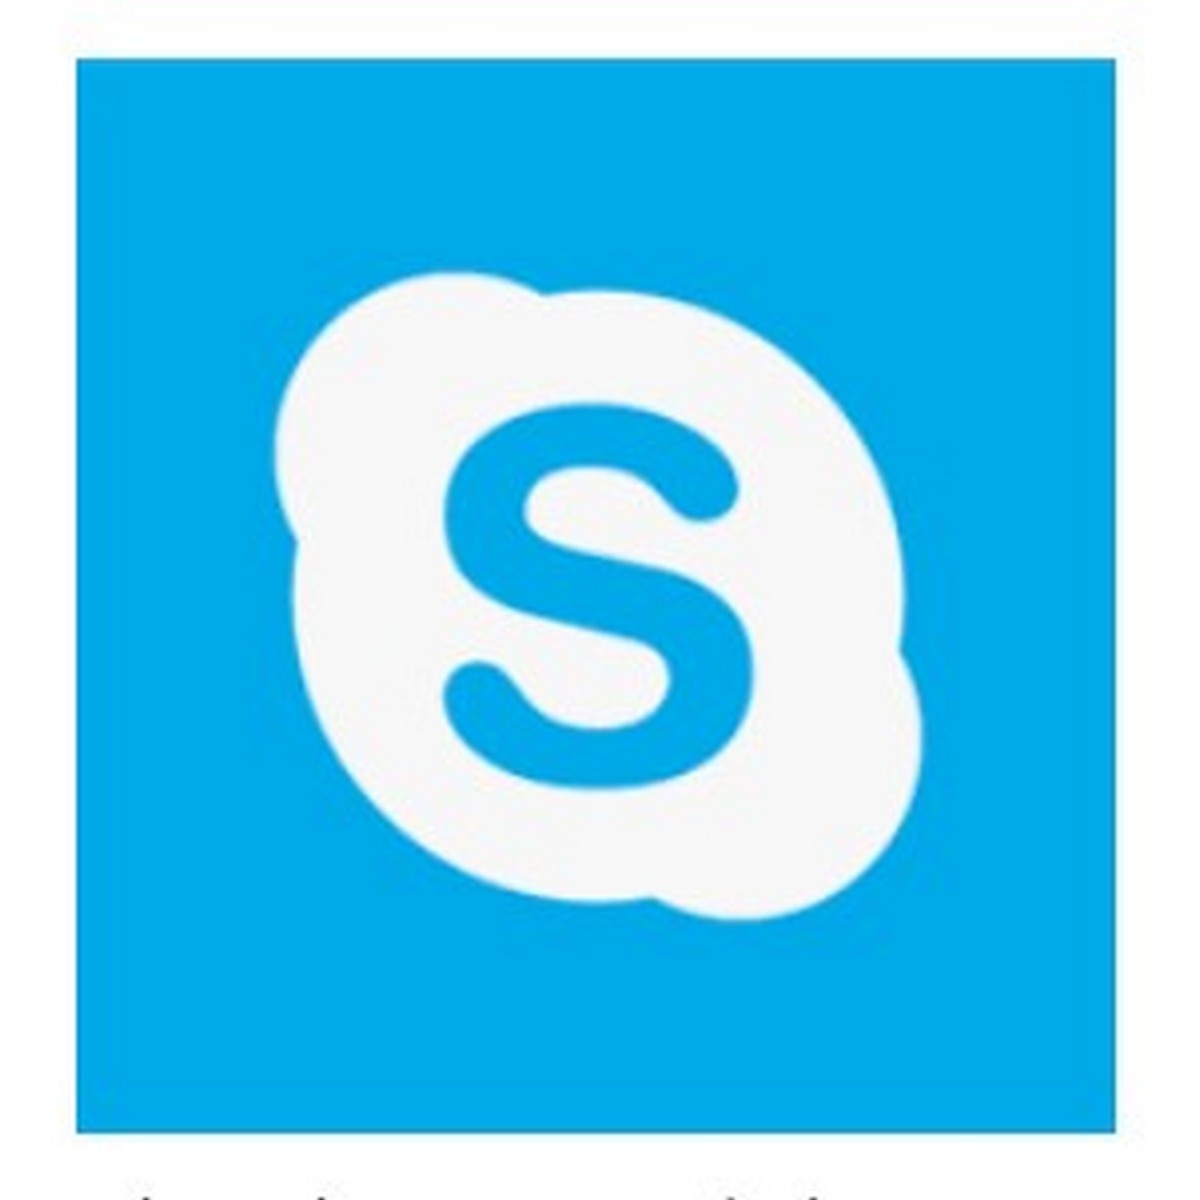 Skype 2021 Latest Version free Download for PC Windows 10/8/7